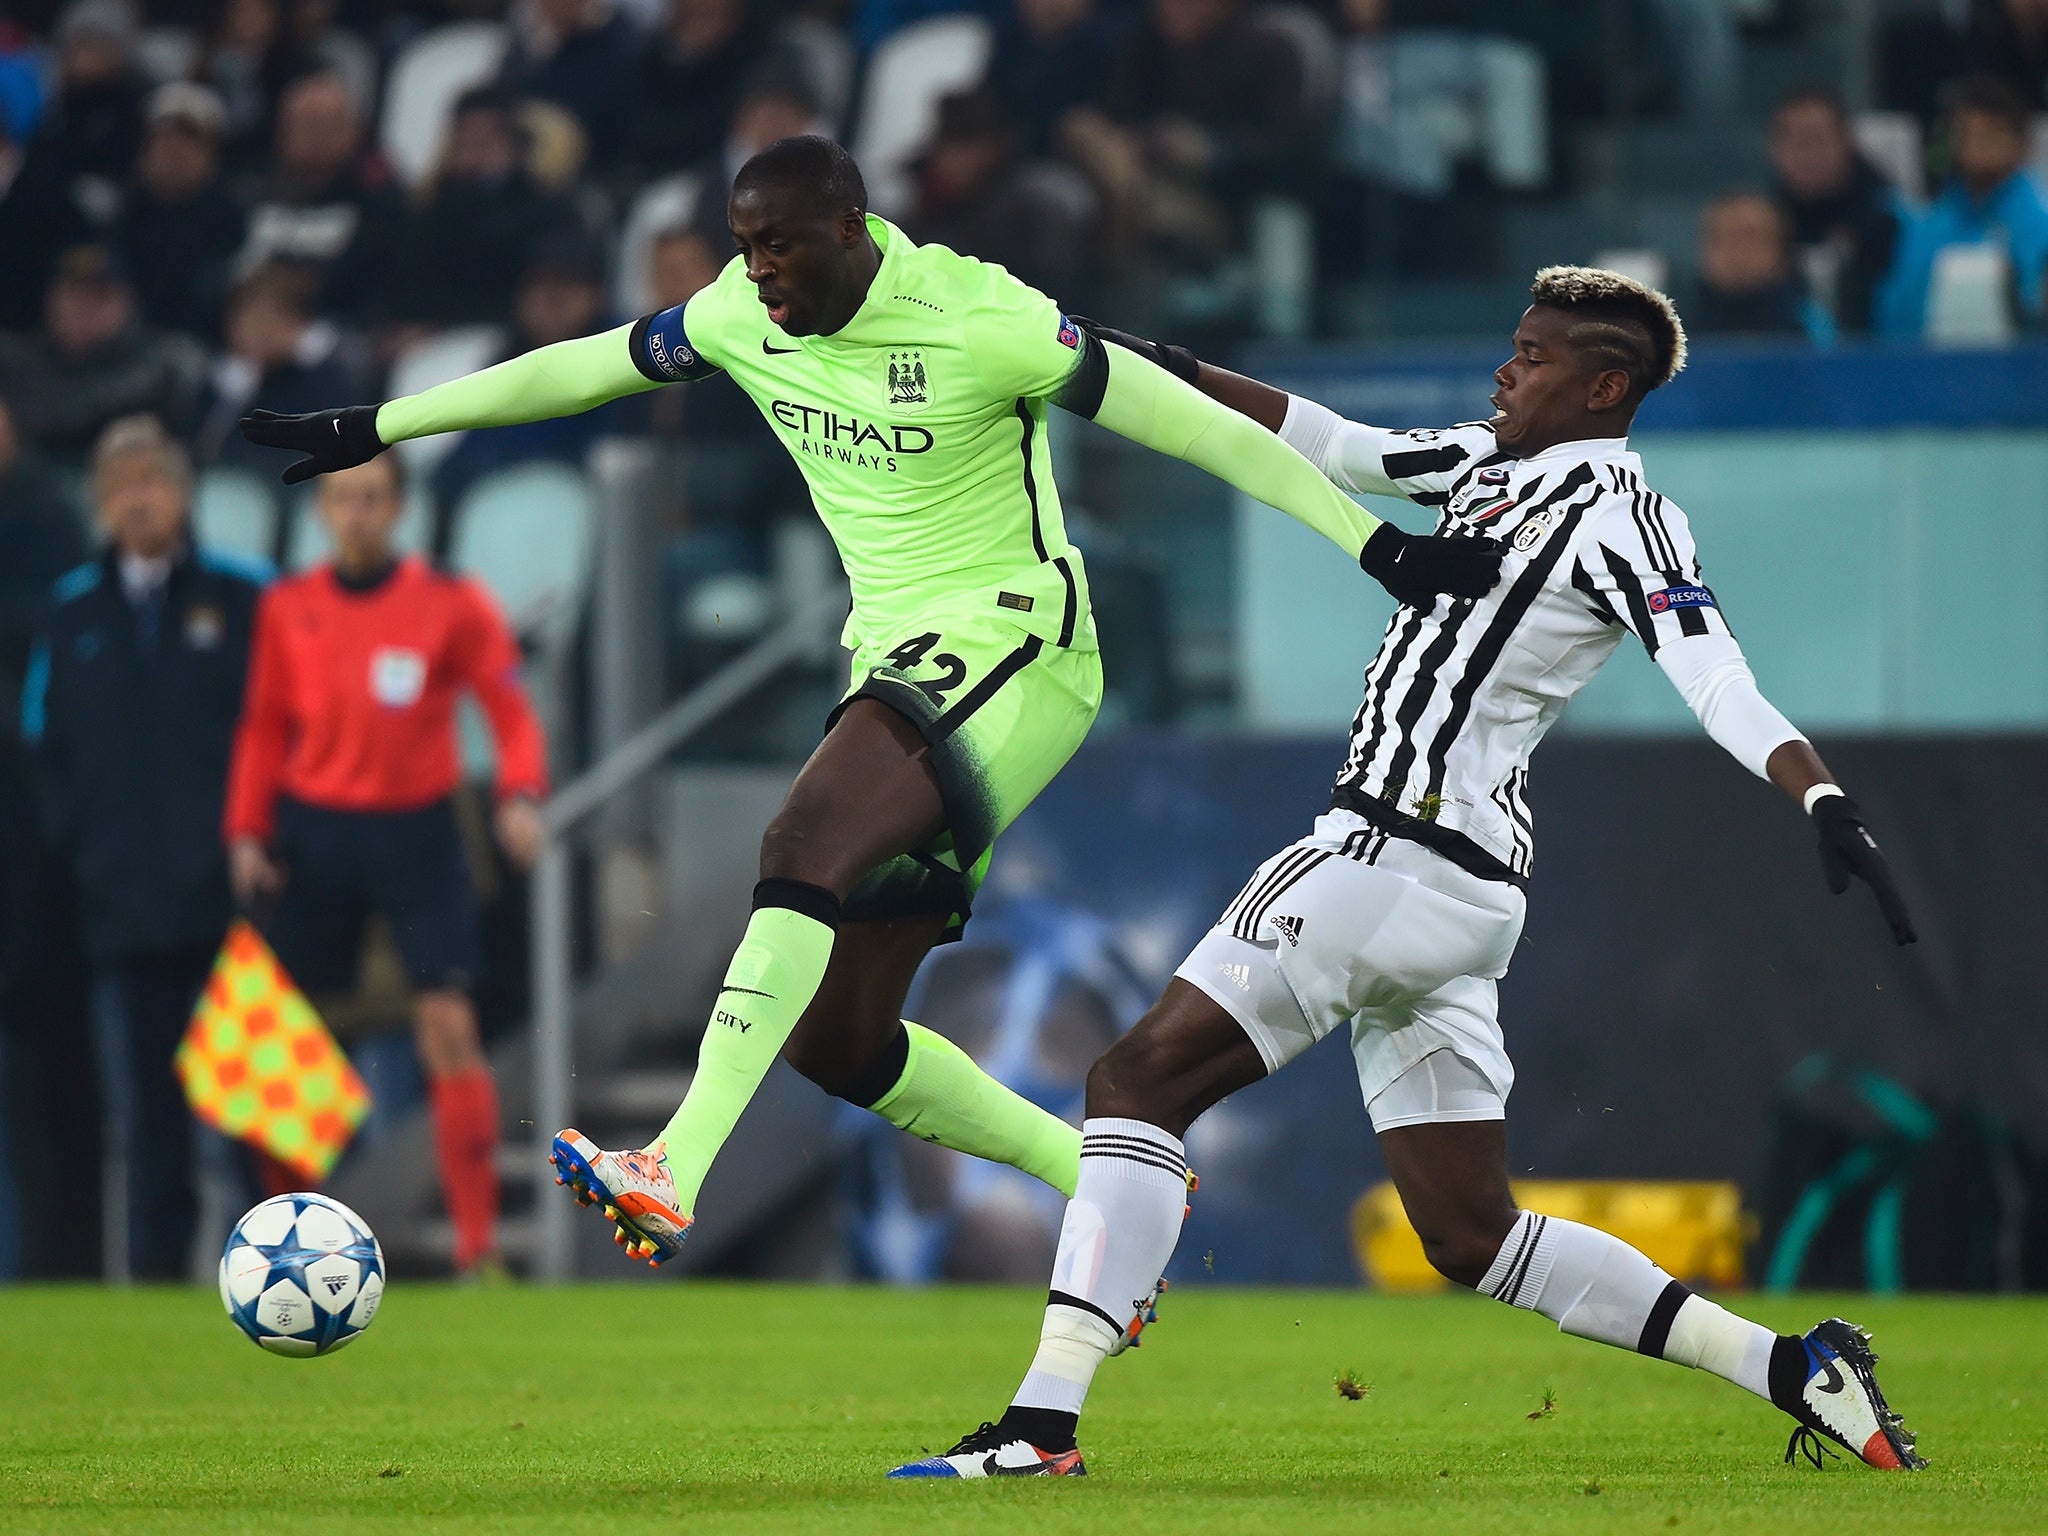 Paul Pogba's Juventus, who finished runners-up to Manchester City, are among the potential opponents